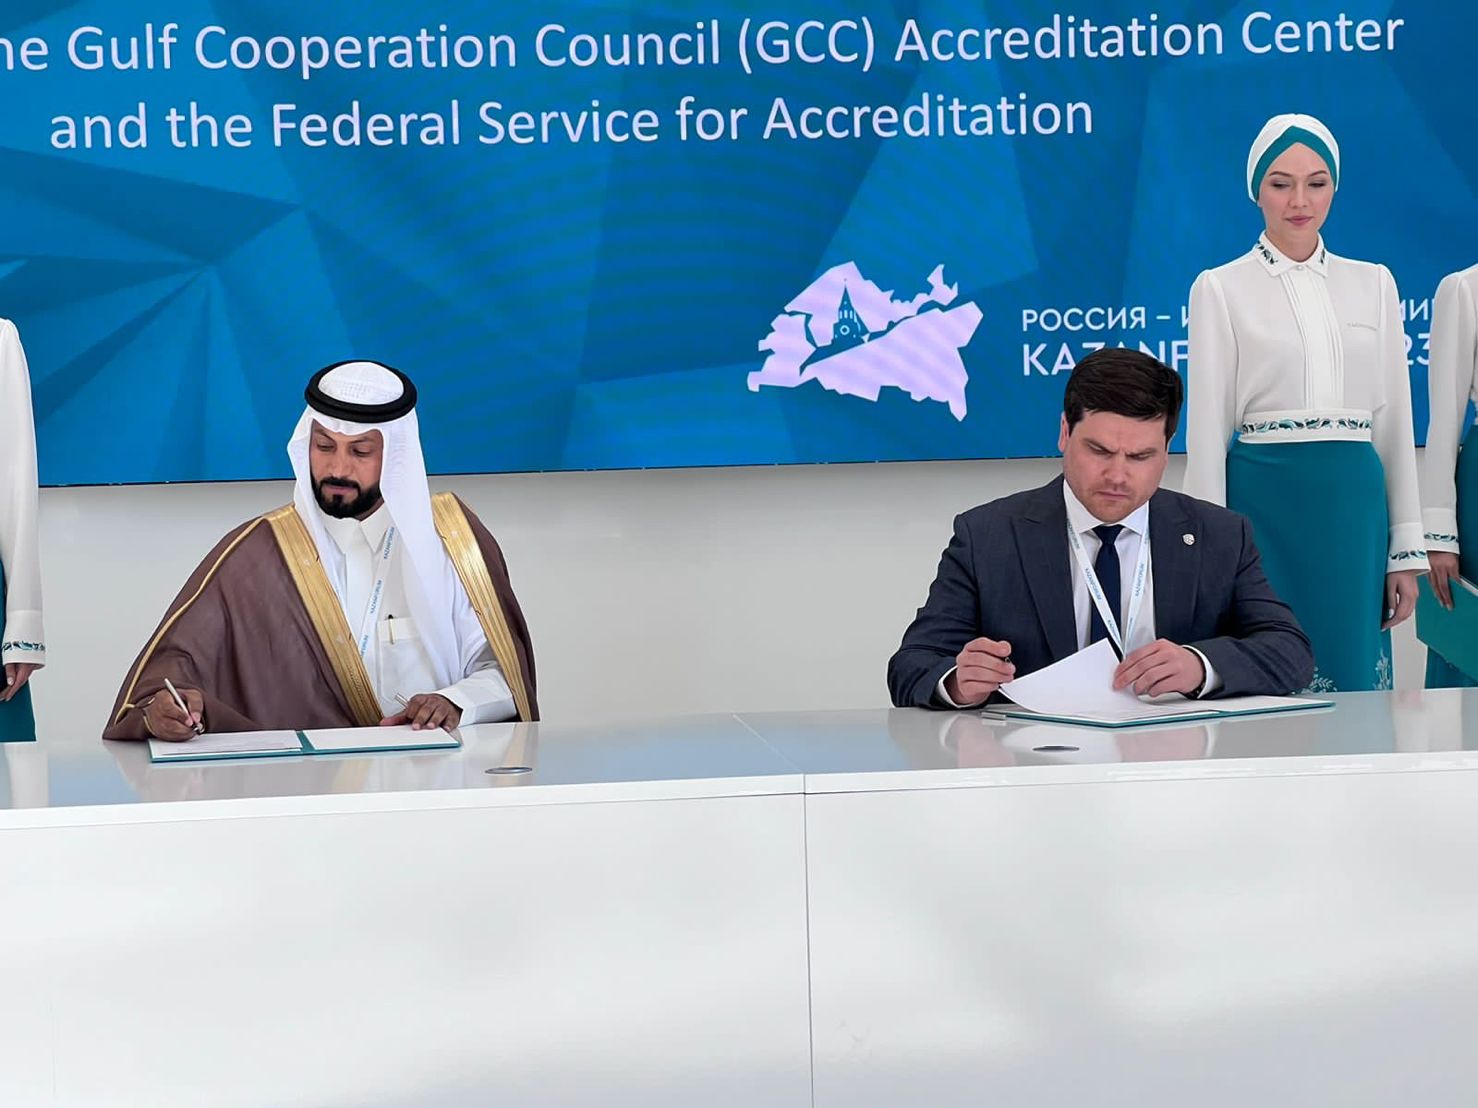 The memorandum of understanding between the Federal Service for Accreditation and the GCC Accreditation Center GAC